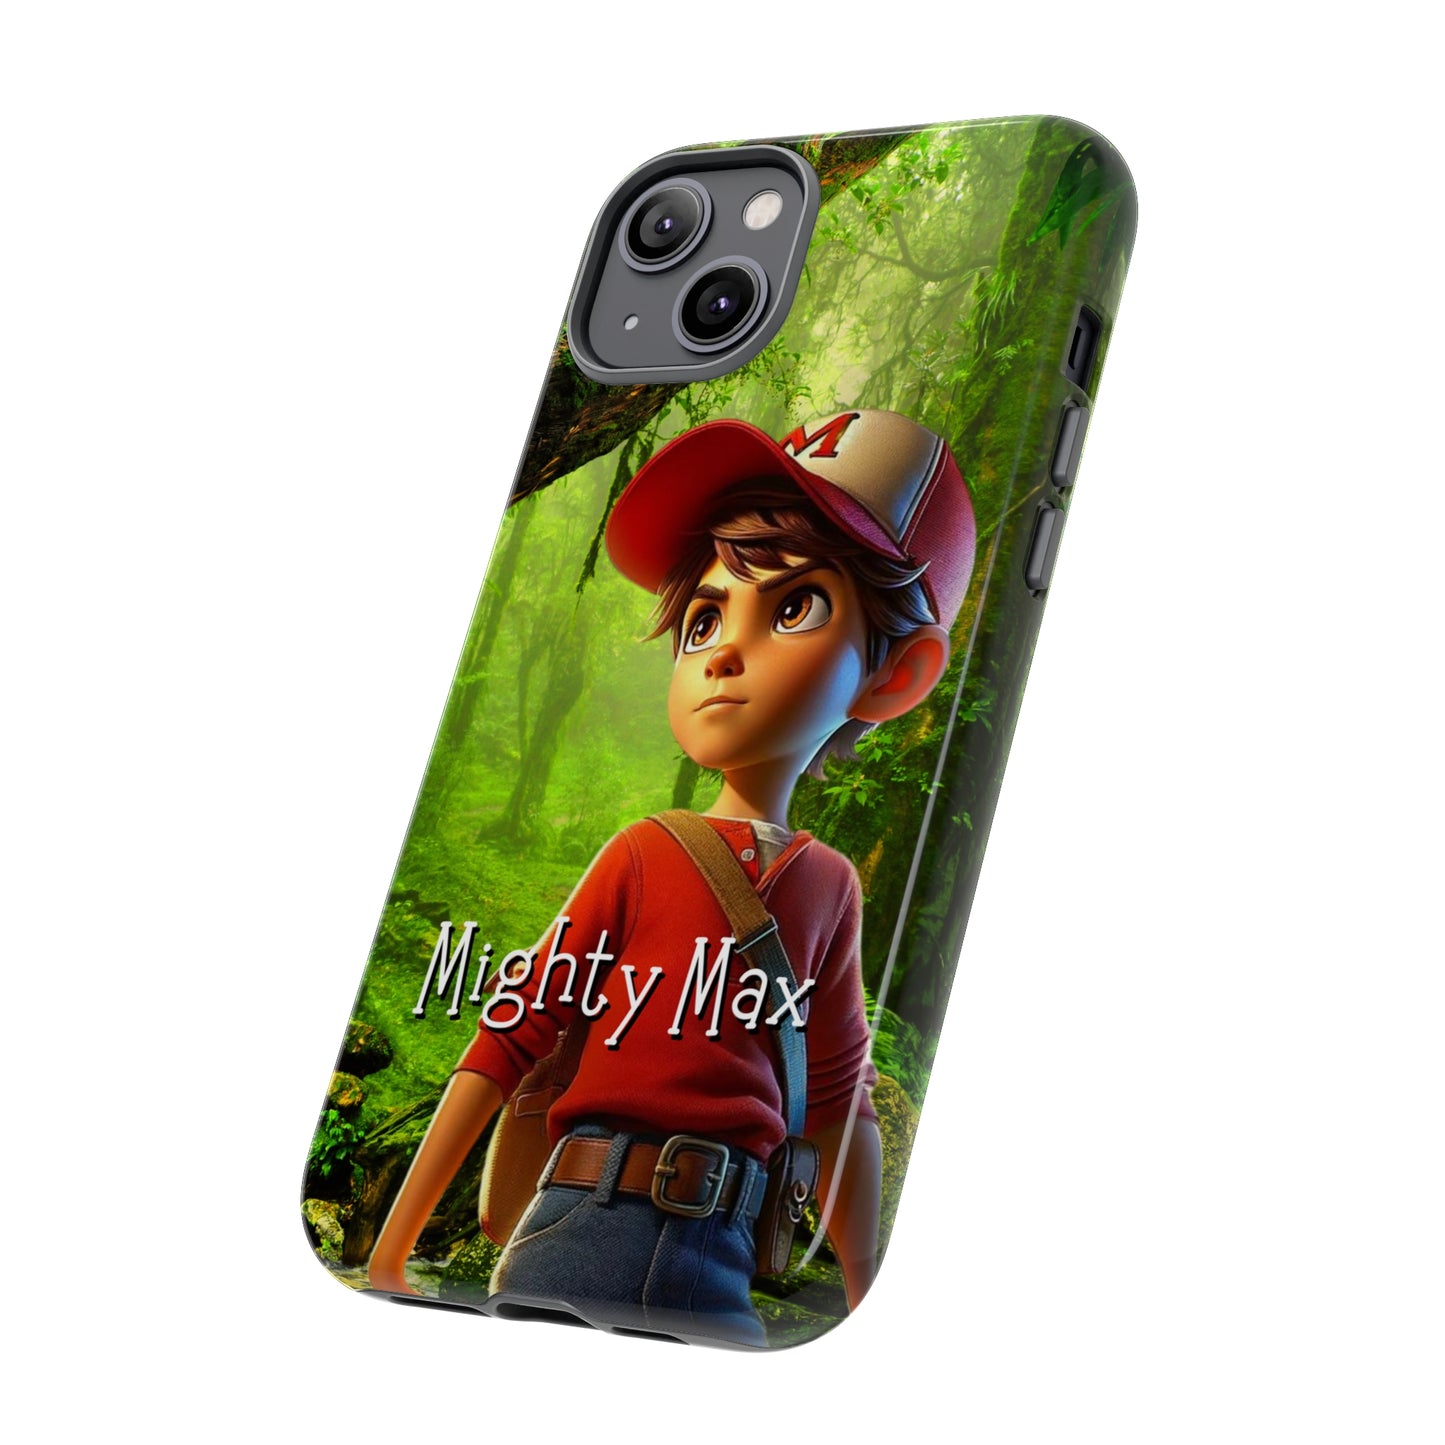 Adventures of Mighty Max - Cell Phone Case